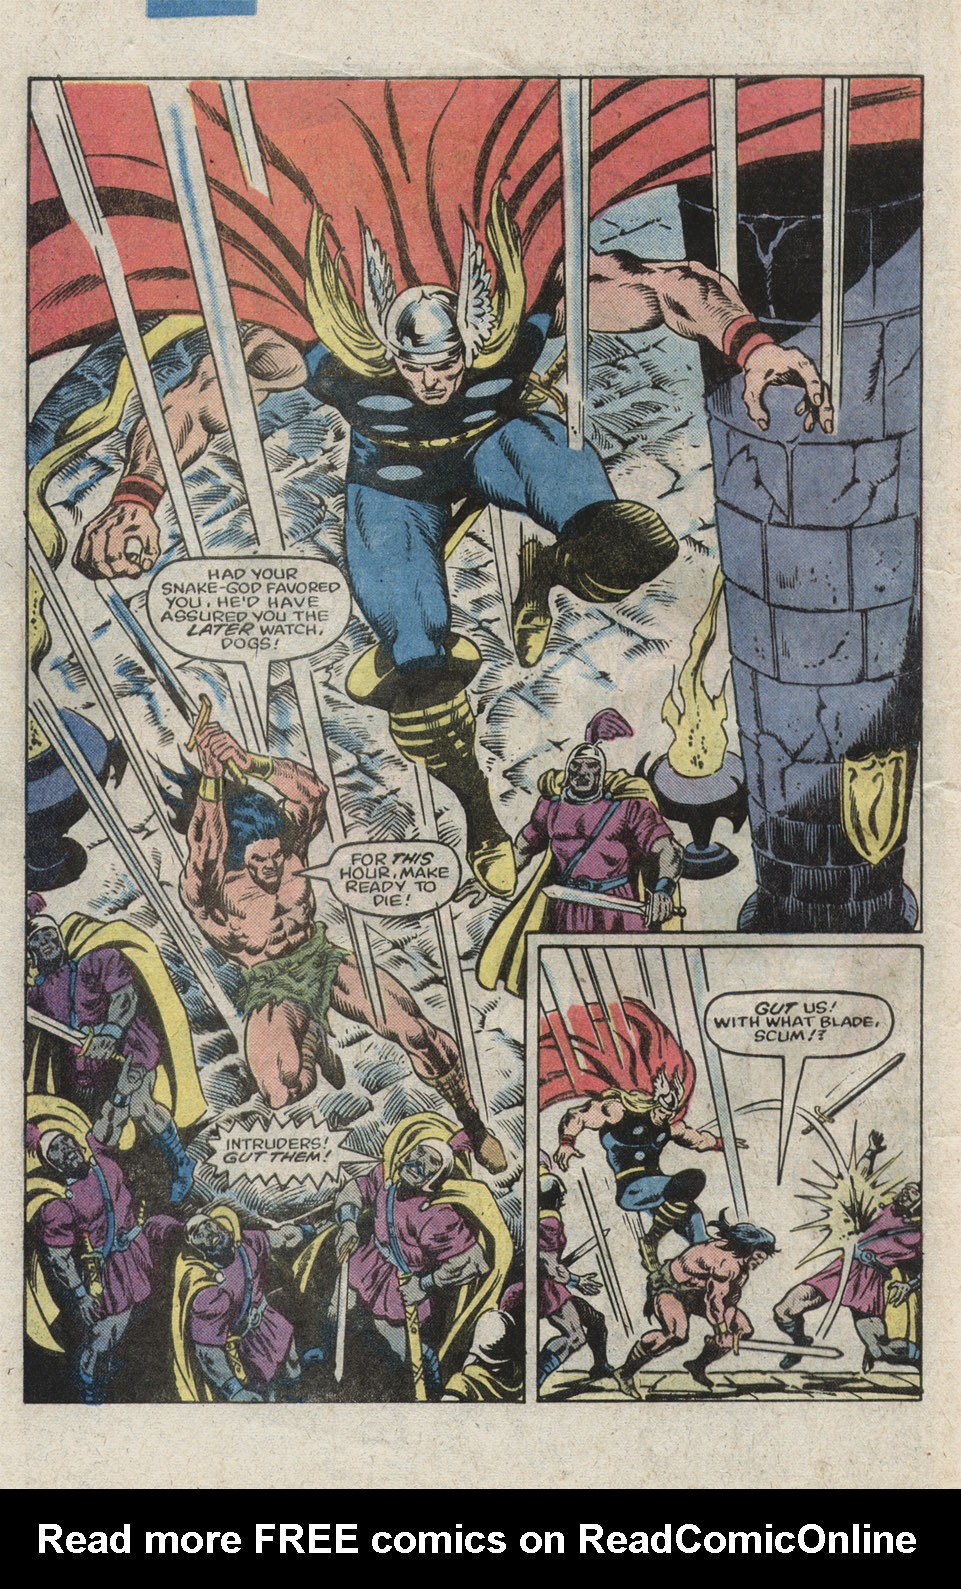 What If? (1977) issue 39 - Thor battled conan - Page 32